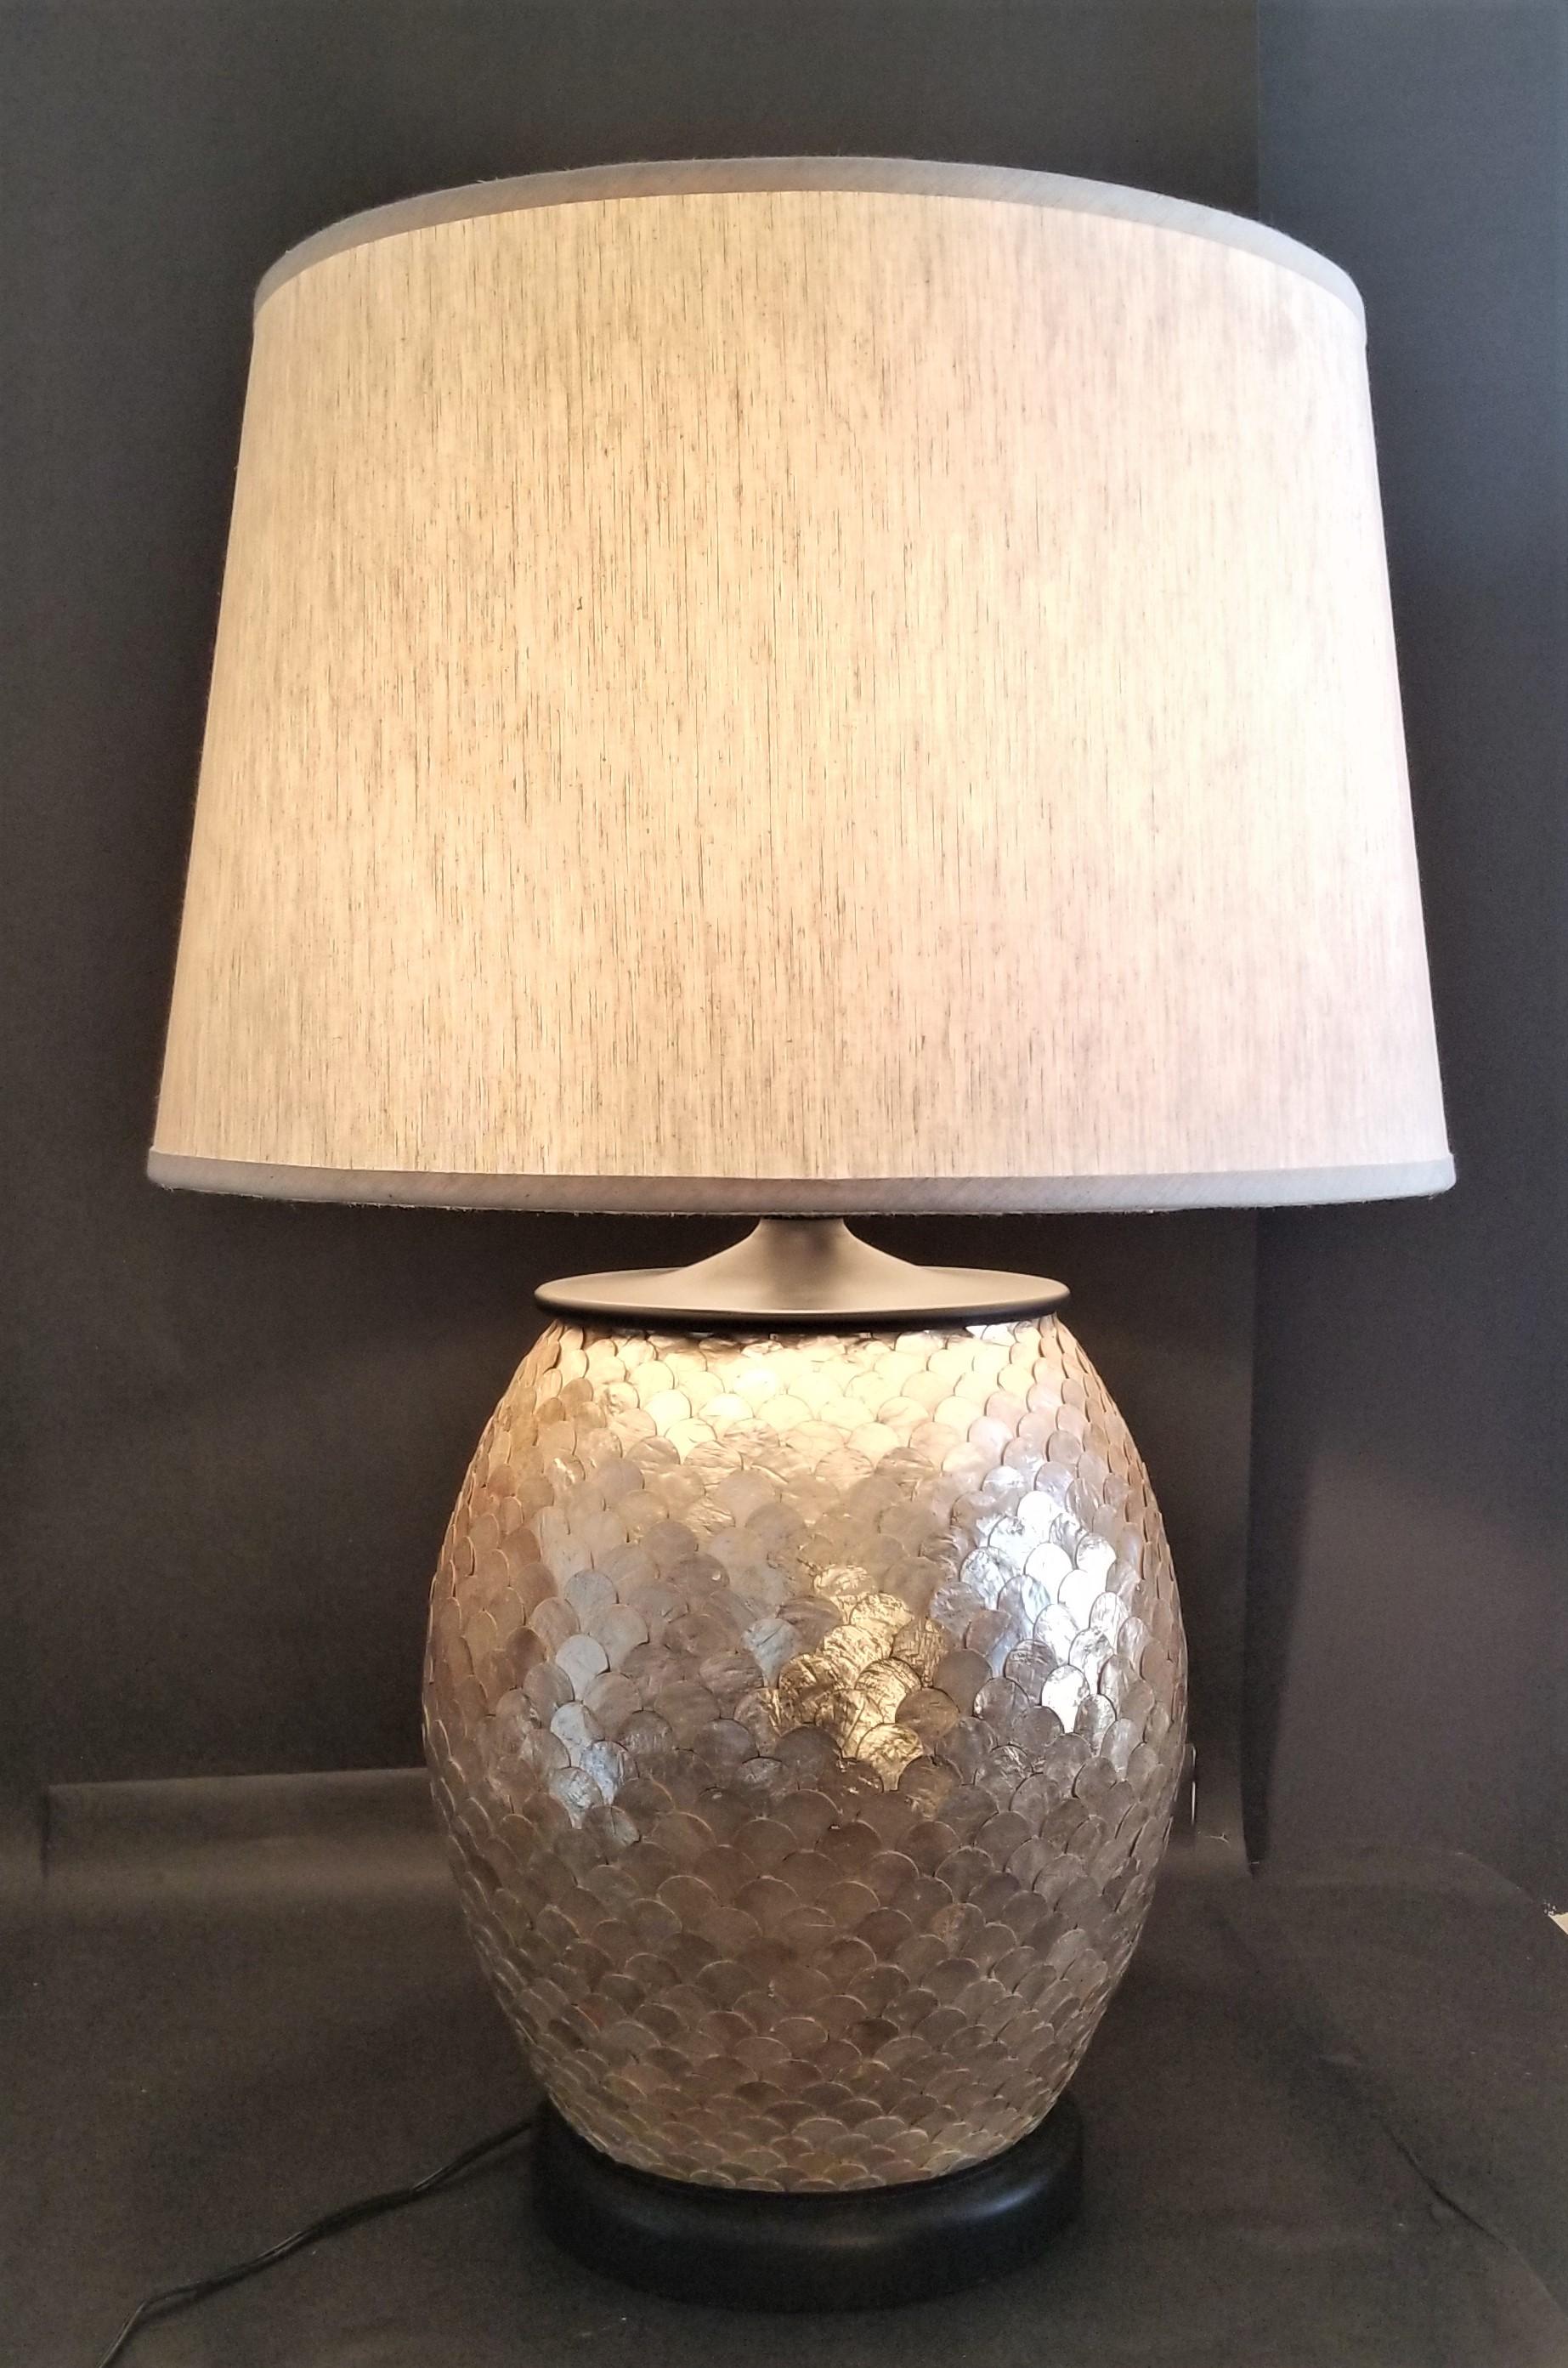 Offering one of our recent palm beach estate fine lighting acquisitions of a
Currey & Company alfresco lamp matte black with iridescent capiz shells with shade

This Currey & Company Lamp is extra large and features a matte black wood base and